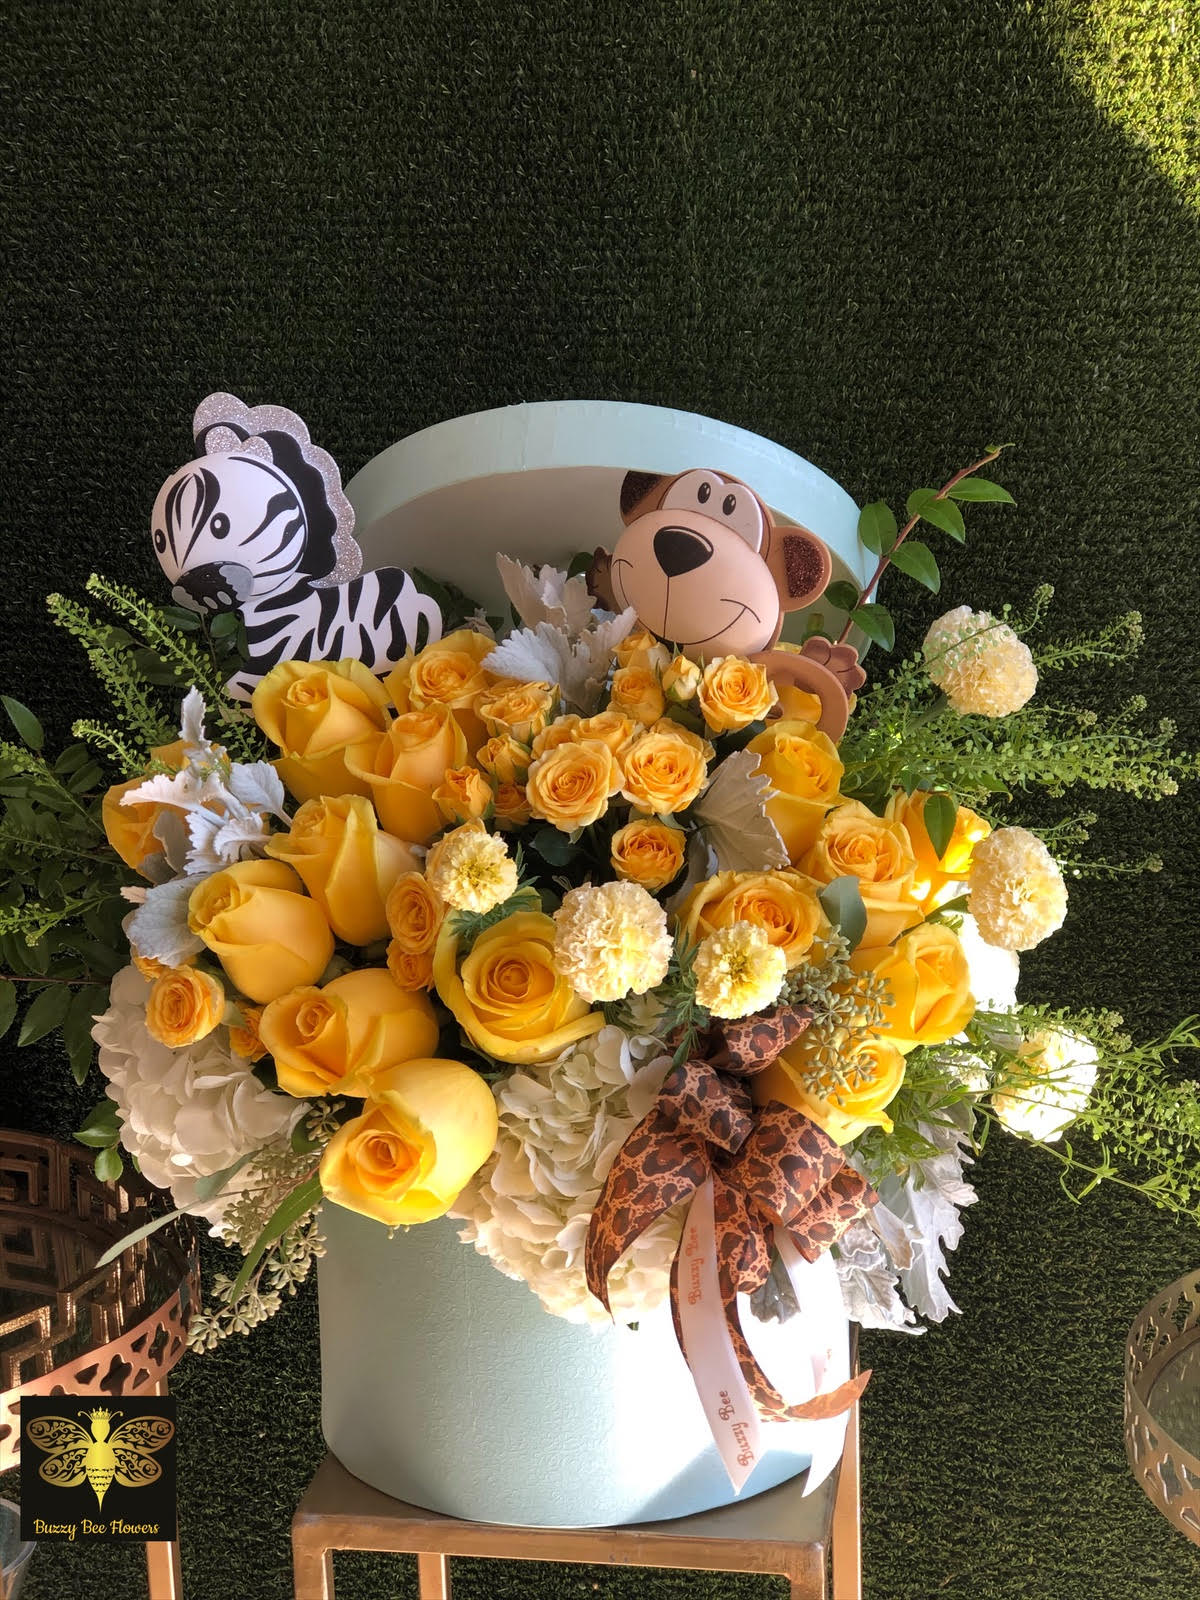 Baby Blue - Sylmar Florist - This beautiful arrangement is designed to deliver happiness to a loved ones day. Themed for a baby boy it is filled with beautiful flowers and customized to perfection, this arrangement is a showstopper! If you want to turn heads then this is the arrangement for you!